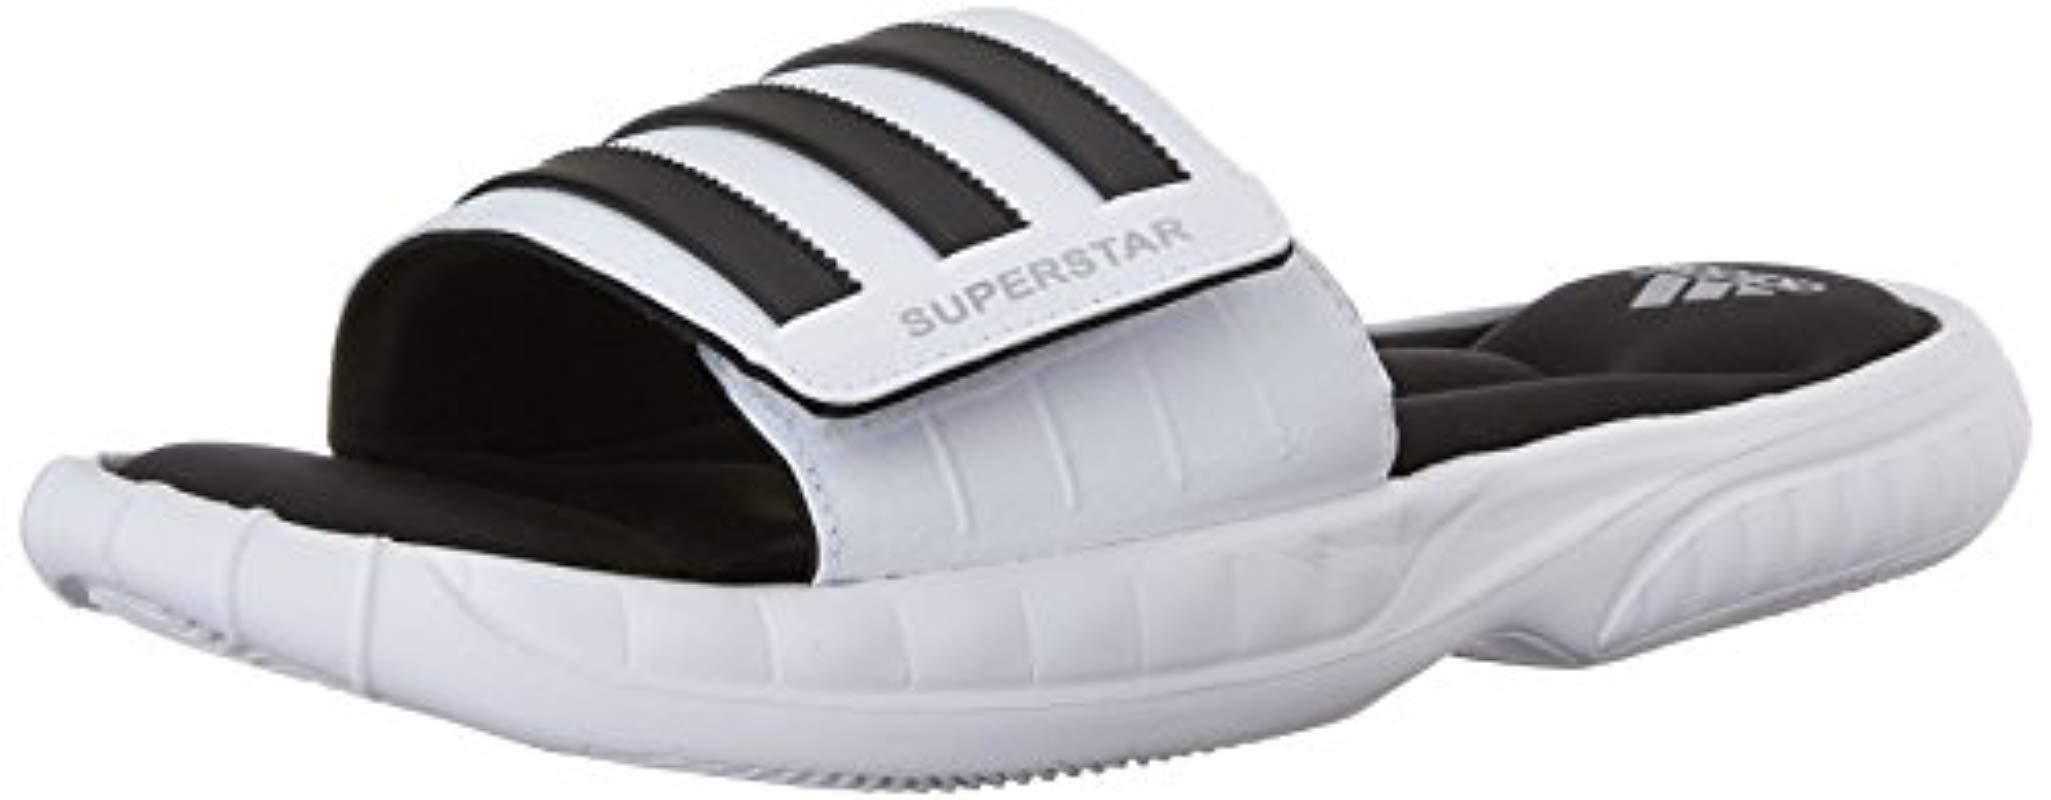 adidas Synthetic Superstar 3g Slide for 